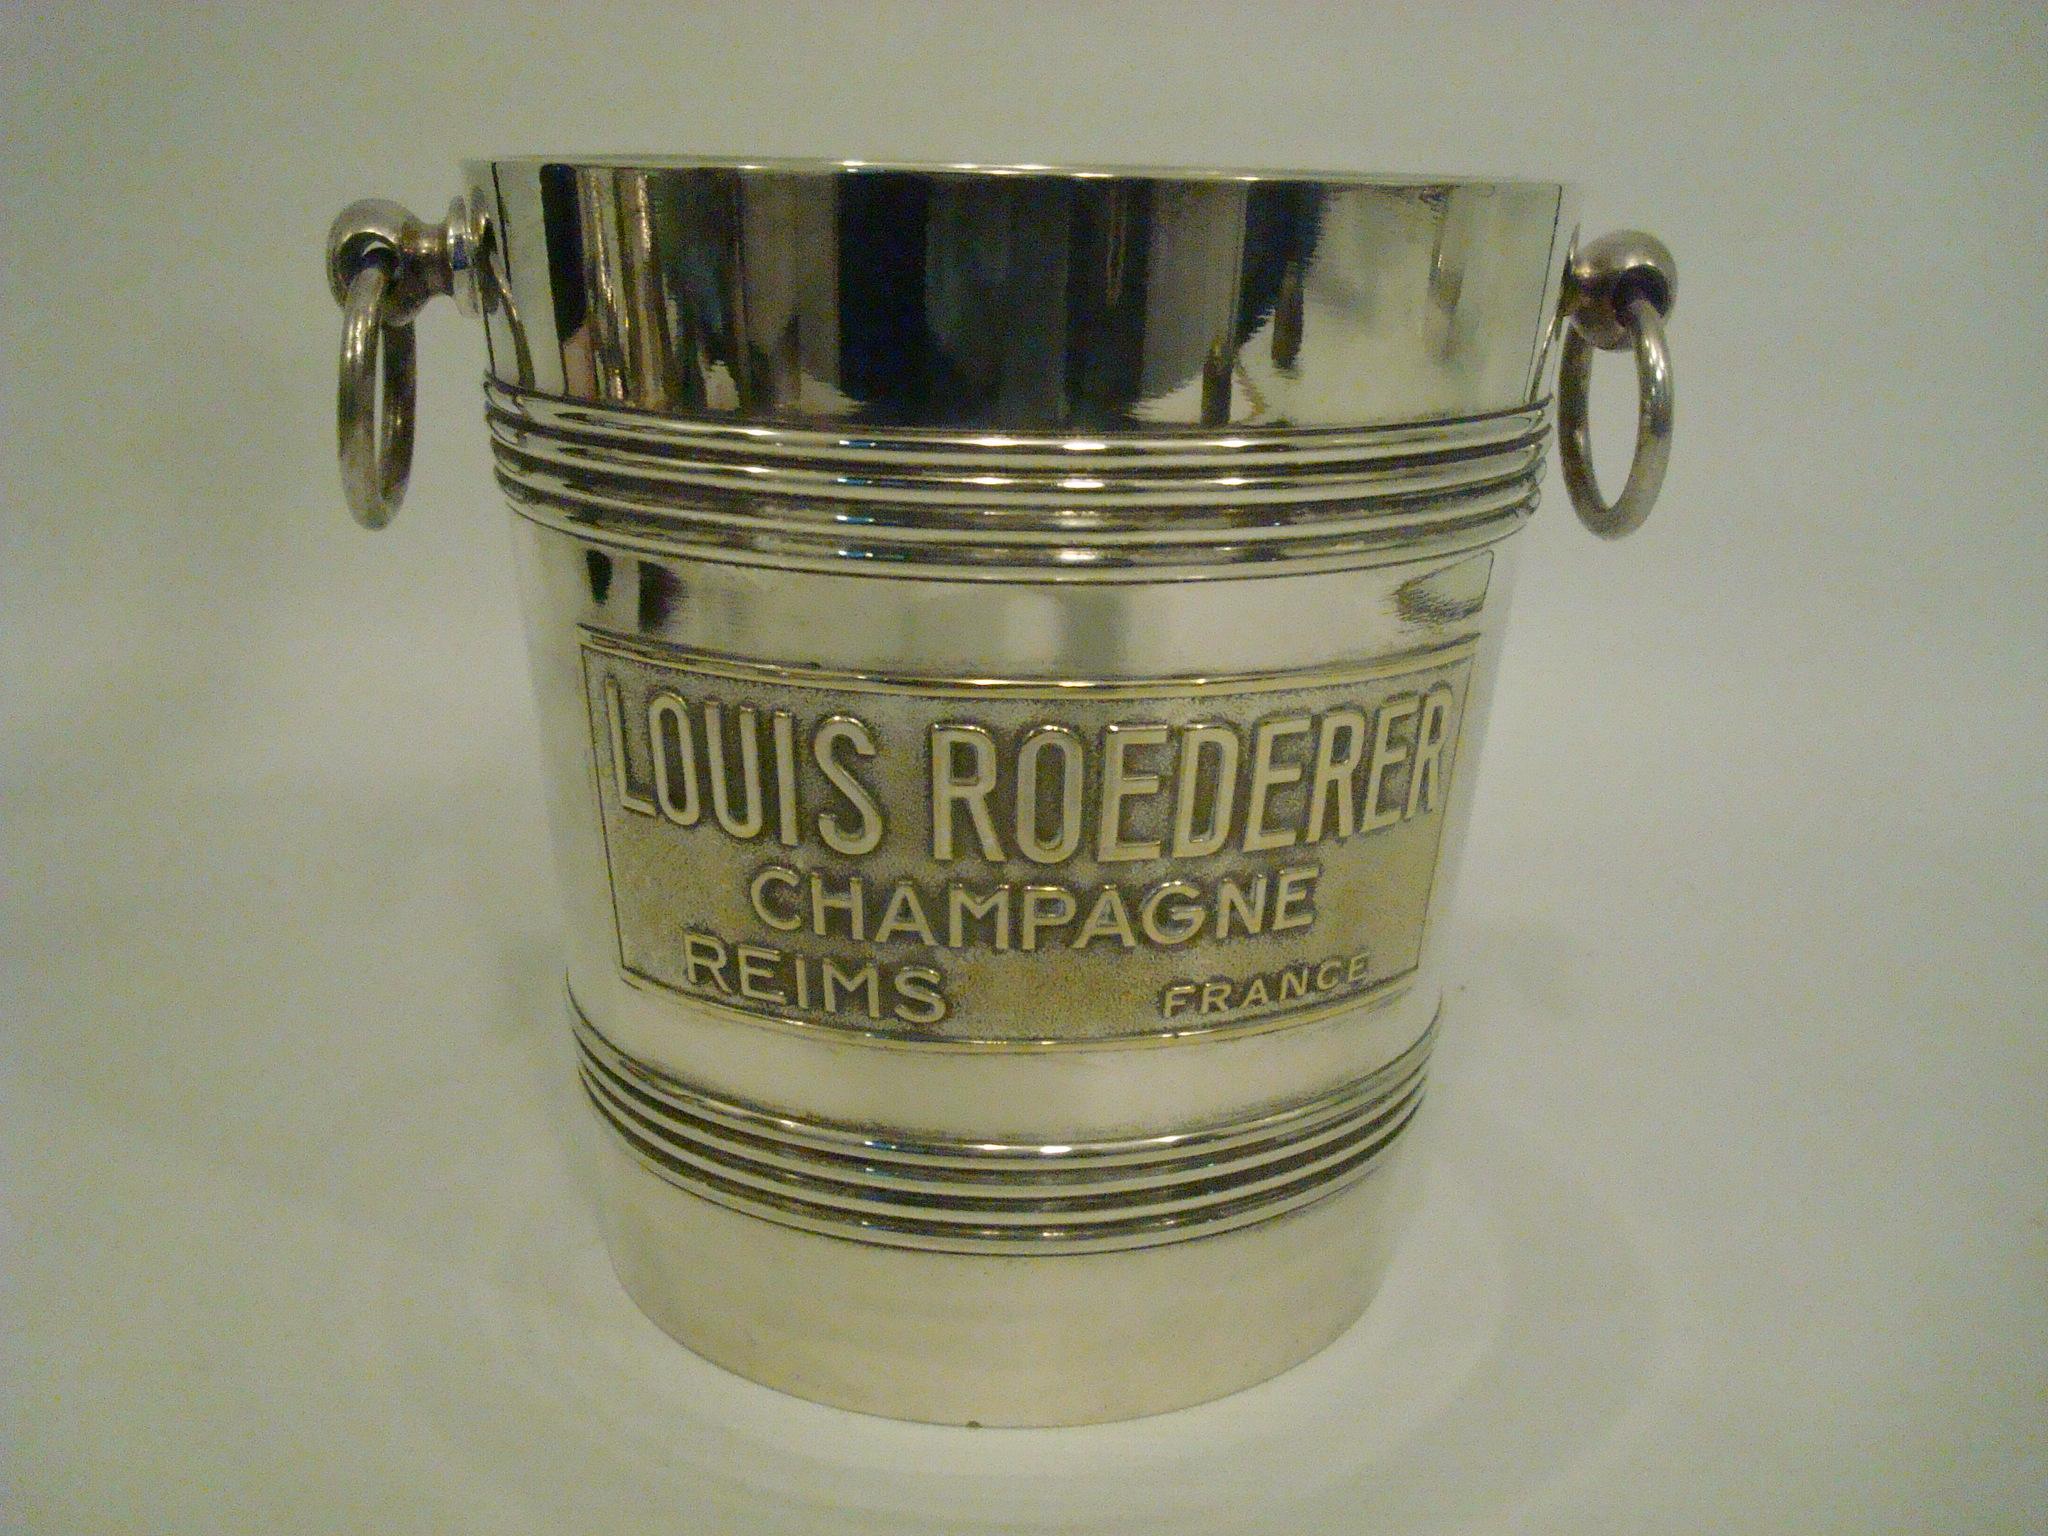 Vintage mid-century Louis Roederer Champagne Cooler / Bucket - Hermes Paris. A vintage brass silvered Louis Roederer Champagne ice bucket, from Paris. Made in France. Stamped Hermes Paris.
Louis Roederer is a producer of champagne based in Reims,